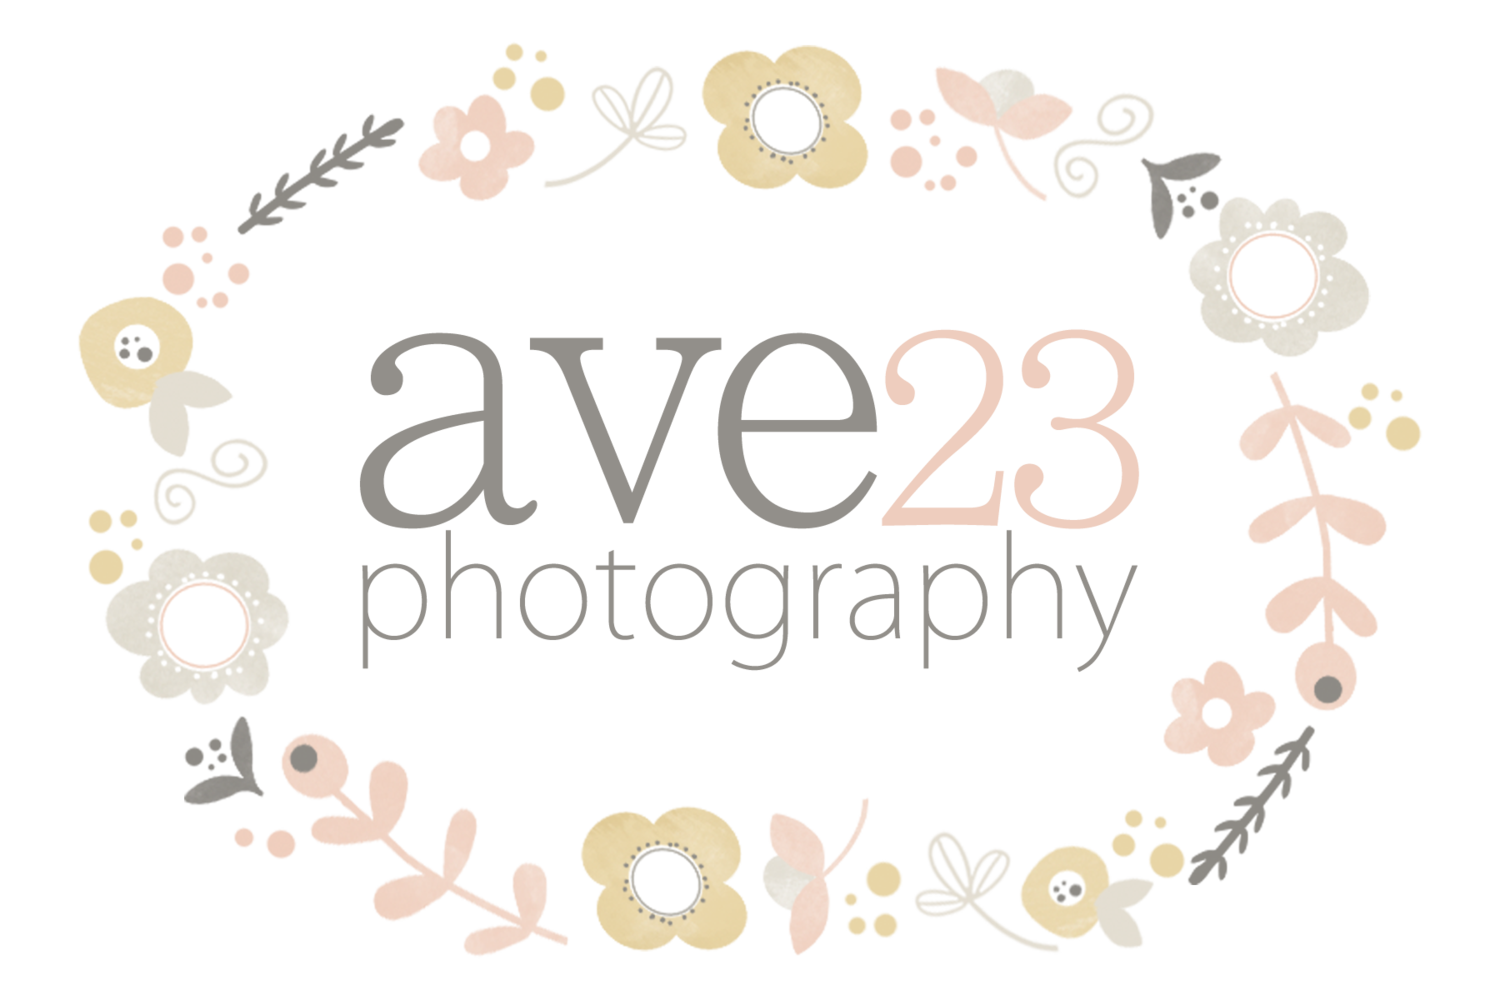 Ave23 Photography